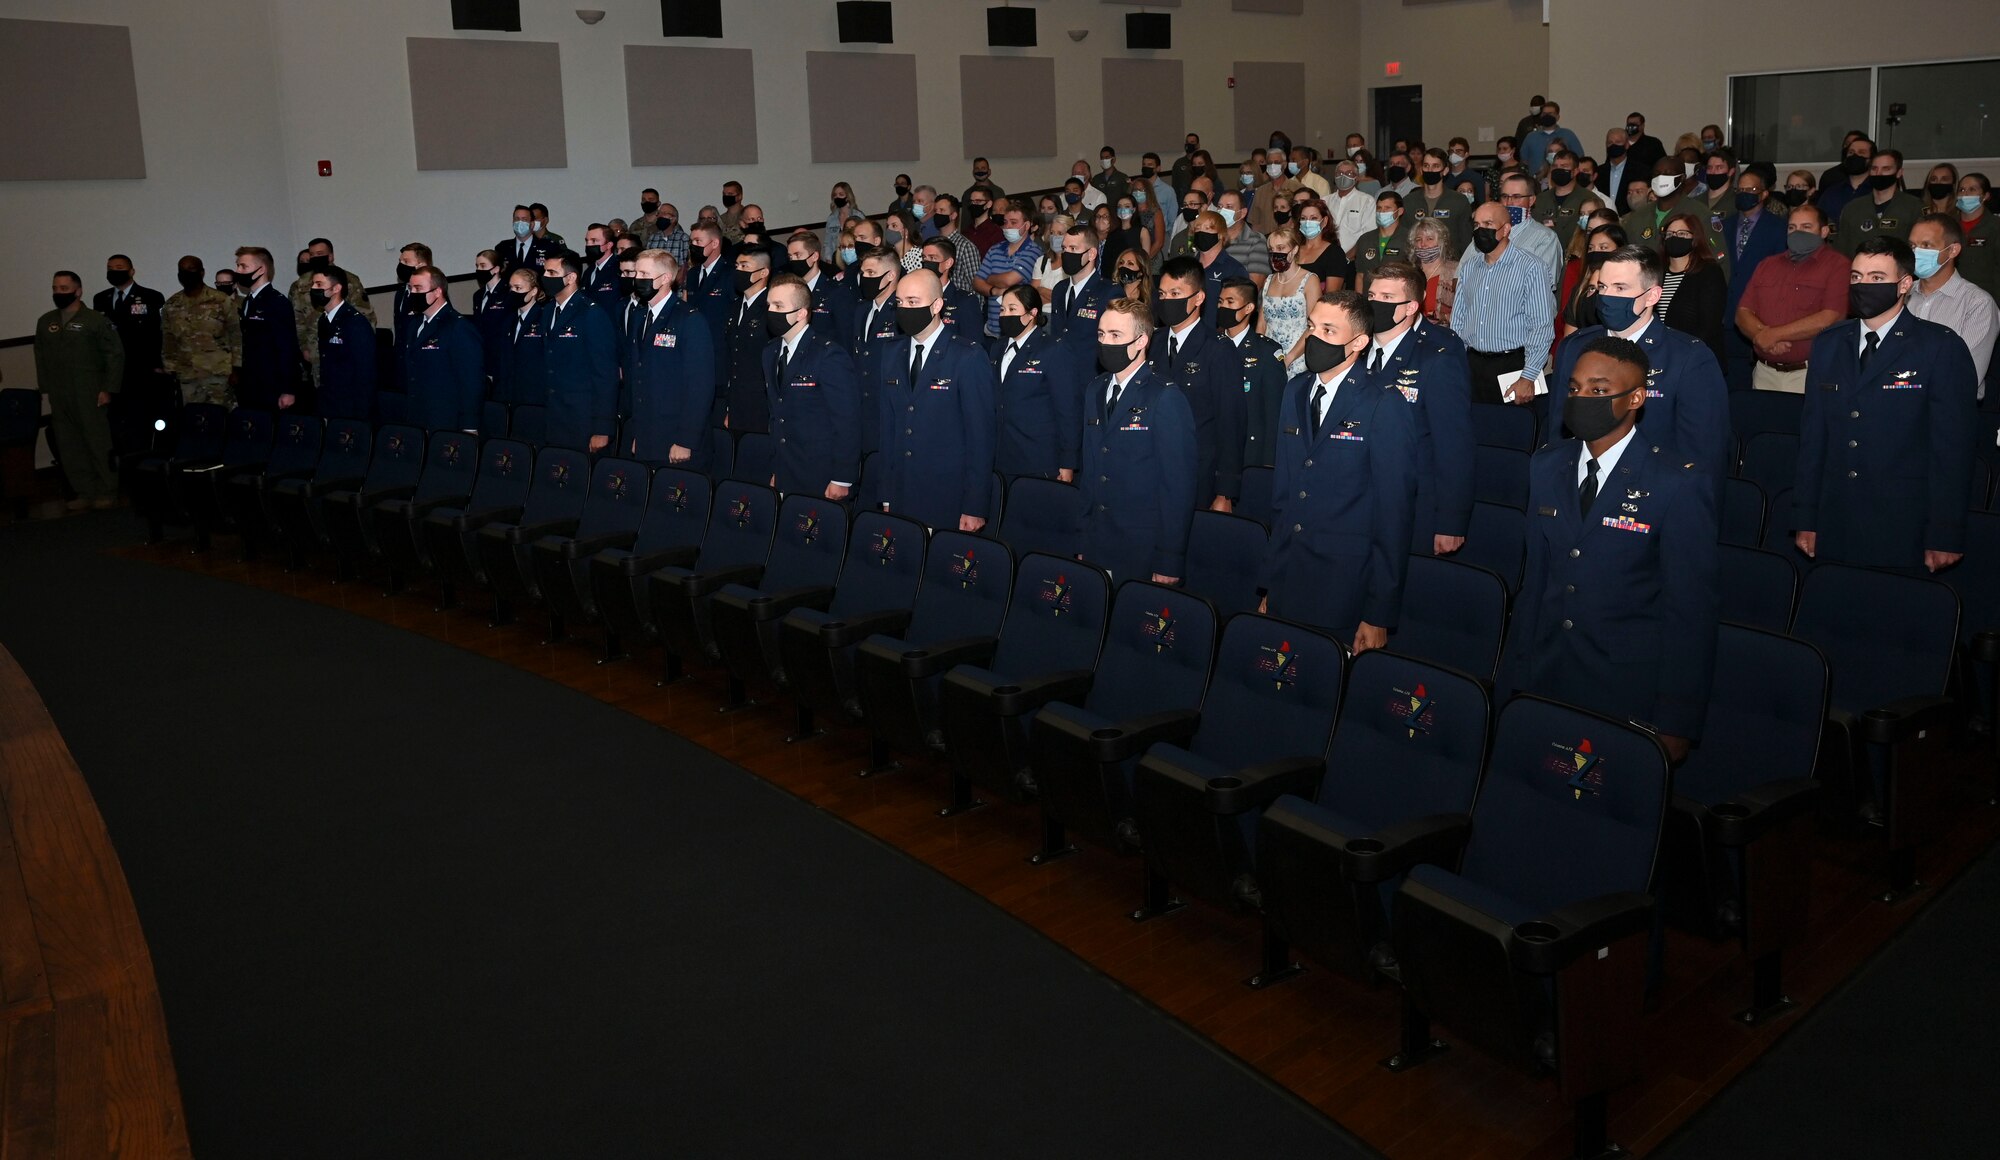 U.S Air Force Specialized Undergraduate Pilot Training graduates, stand at attention during the playing of the Guatemalan, Japanese, and United States National Anthems, Oct.1, 2021, on Columbus Air Force Base, Miss. Thirty-two officers graduated in class 21-16, becoming the U.S. Air Forces newest aviators. (U.S Air Force photo by Airman 1st Class Jessica Haynie)